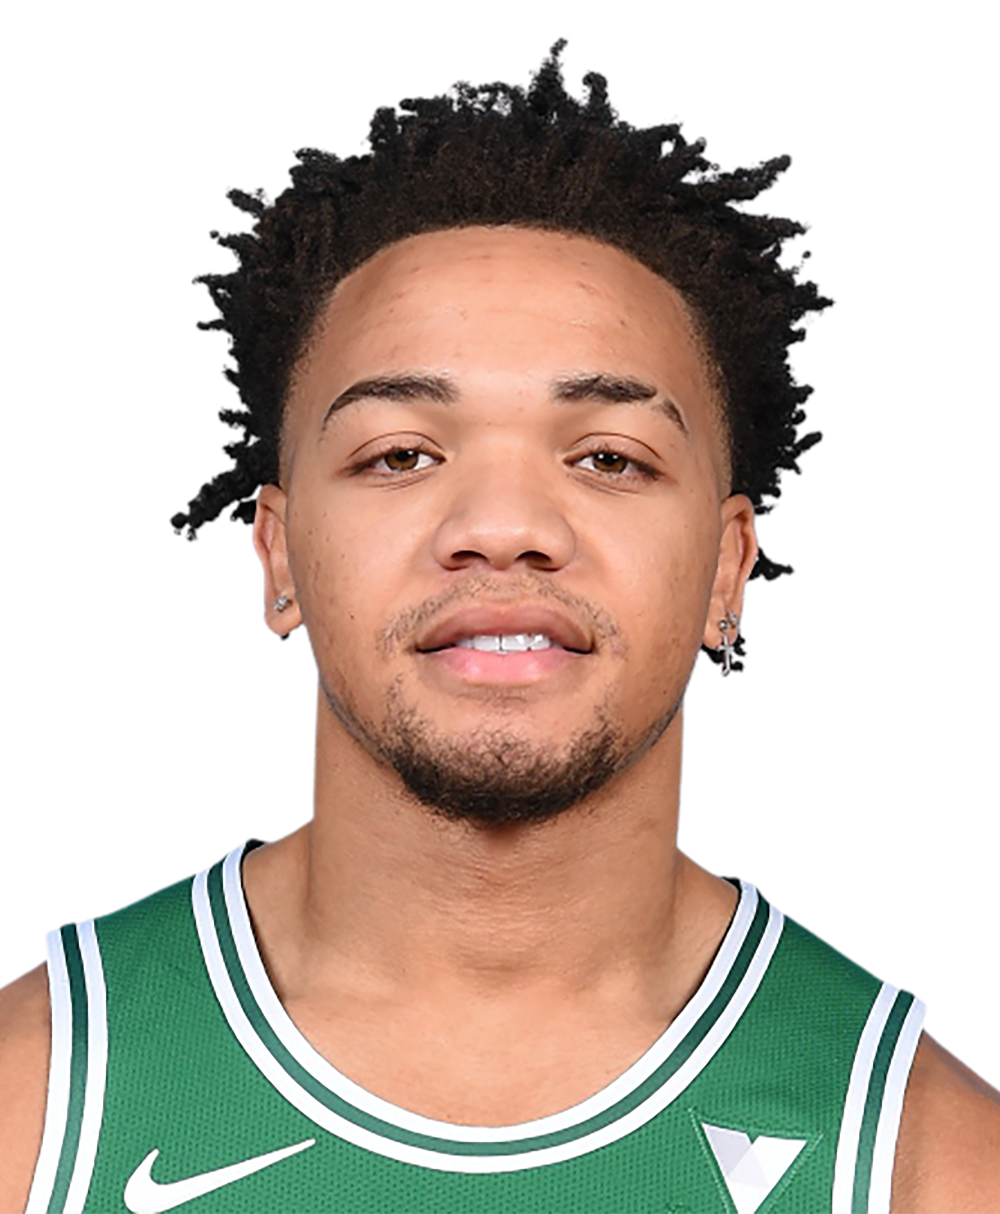 Carsen Edwards signs two-year deal with Pistons